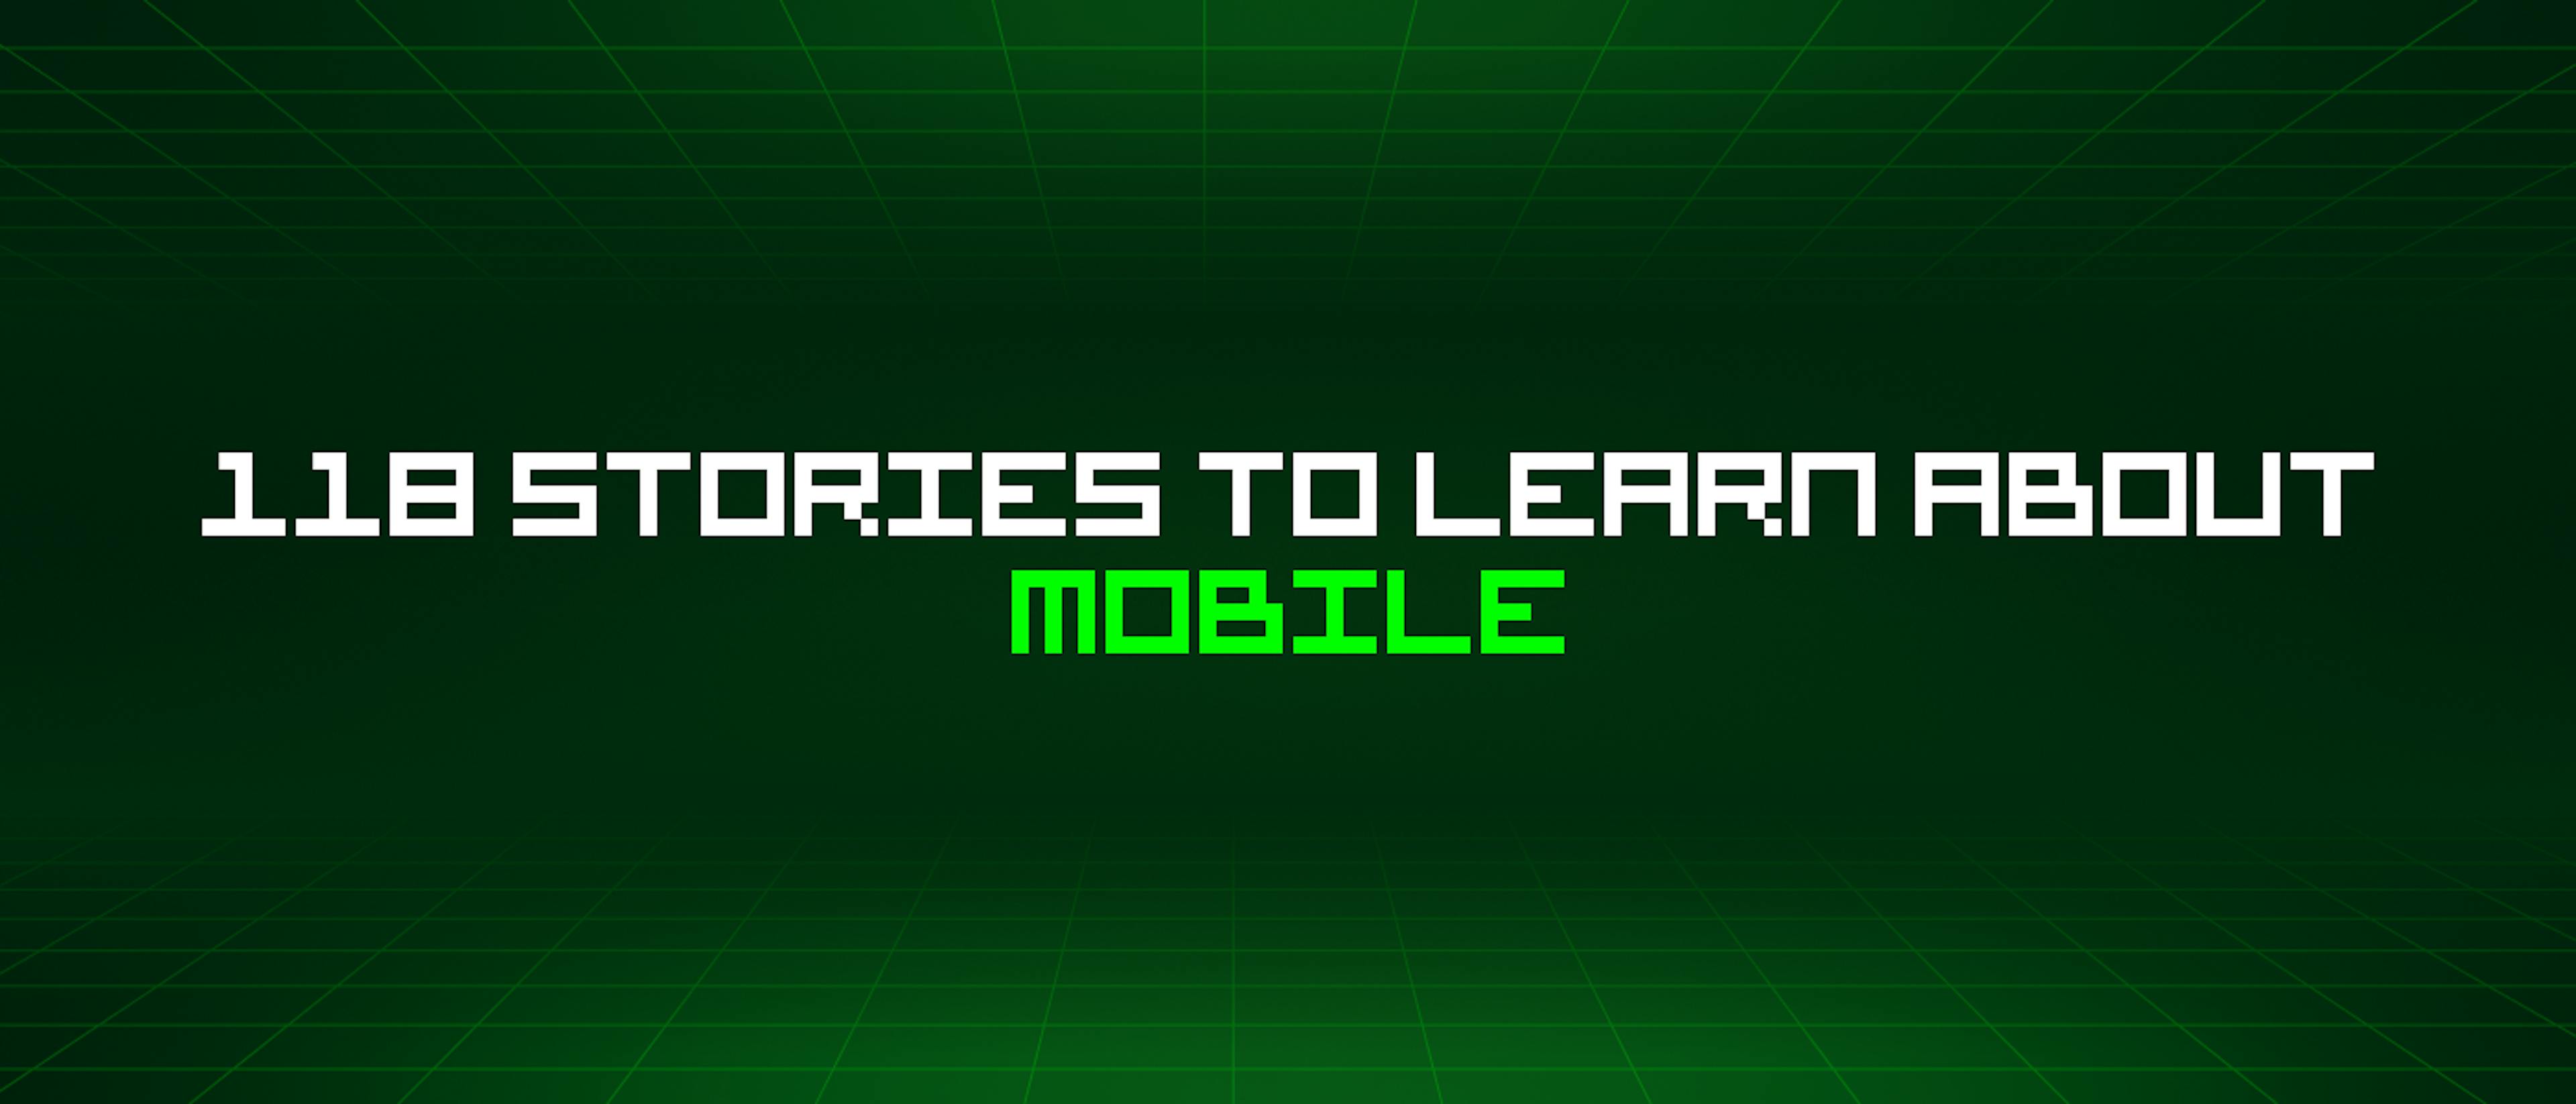 featured image - 118 Stories To Learn About Mobile